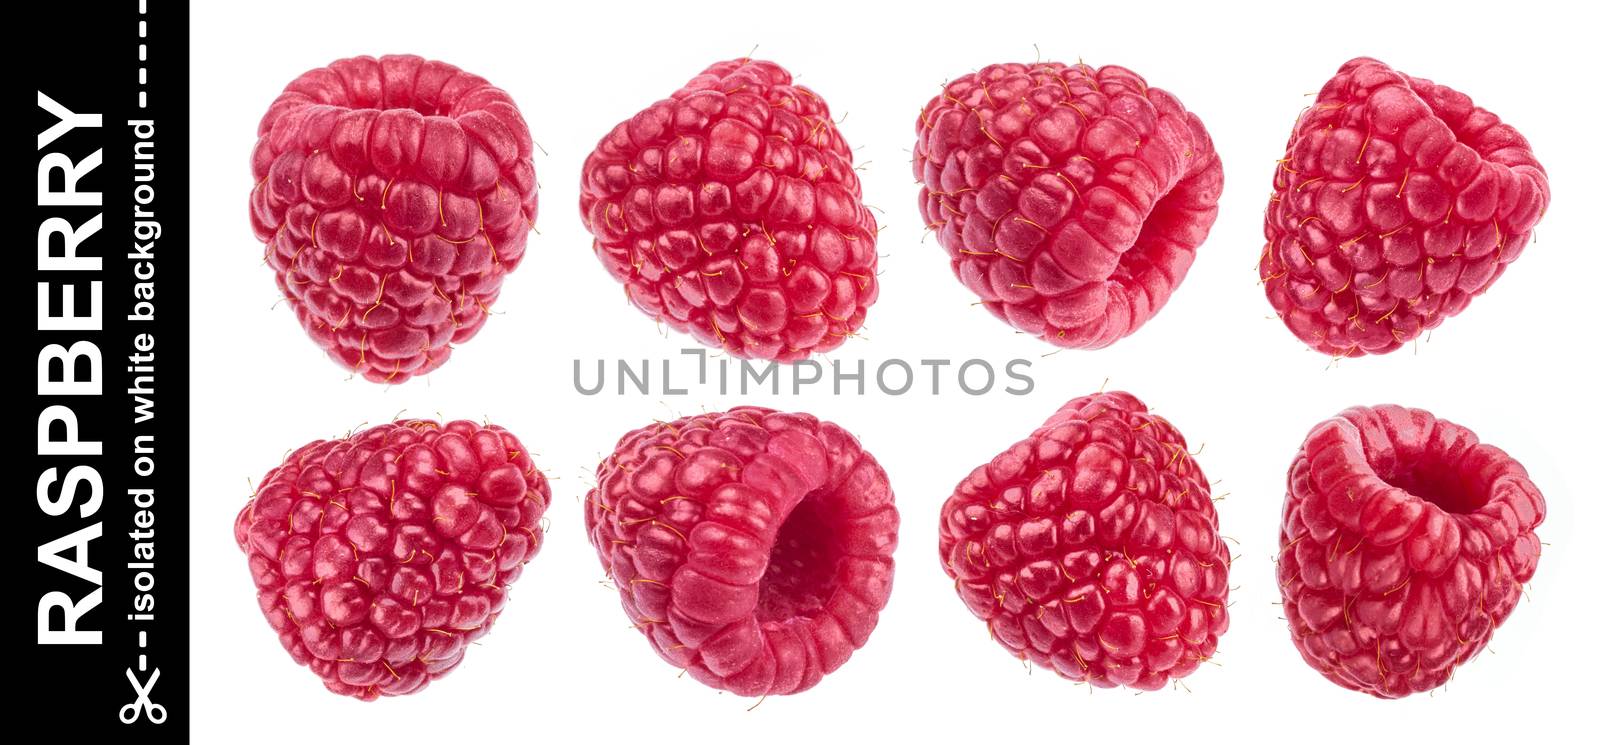 Raspberry isolated on white background. Collection of fresh raspberries. View from different angles.